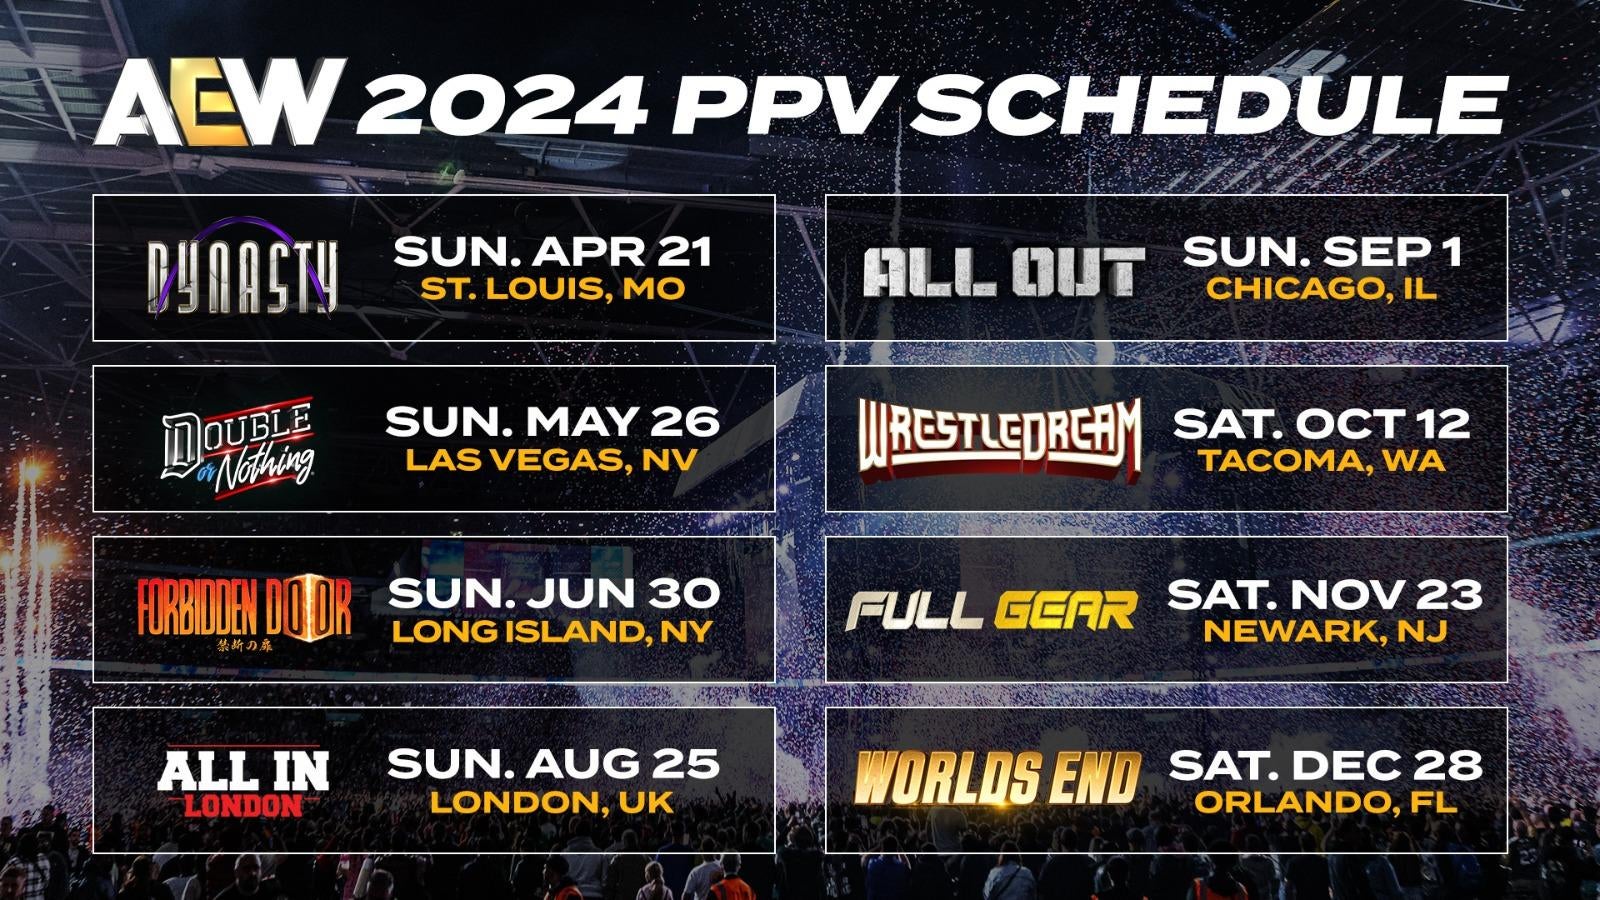 AEW Announces Full PayPerView Schedule For 2024